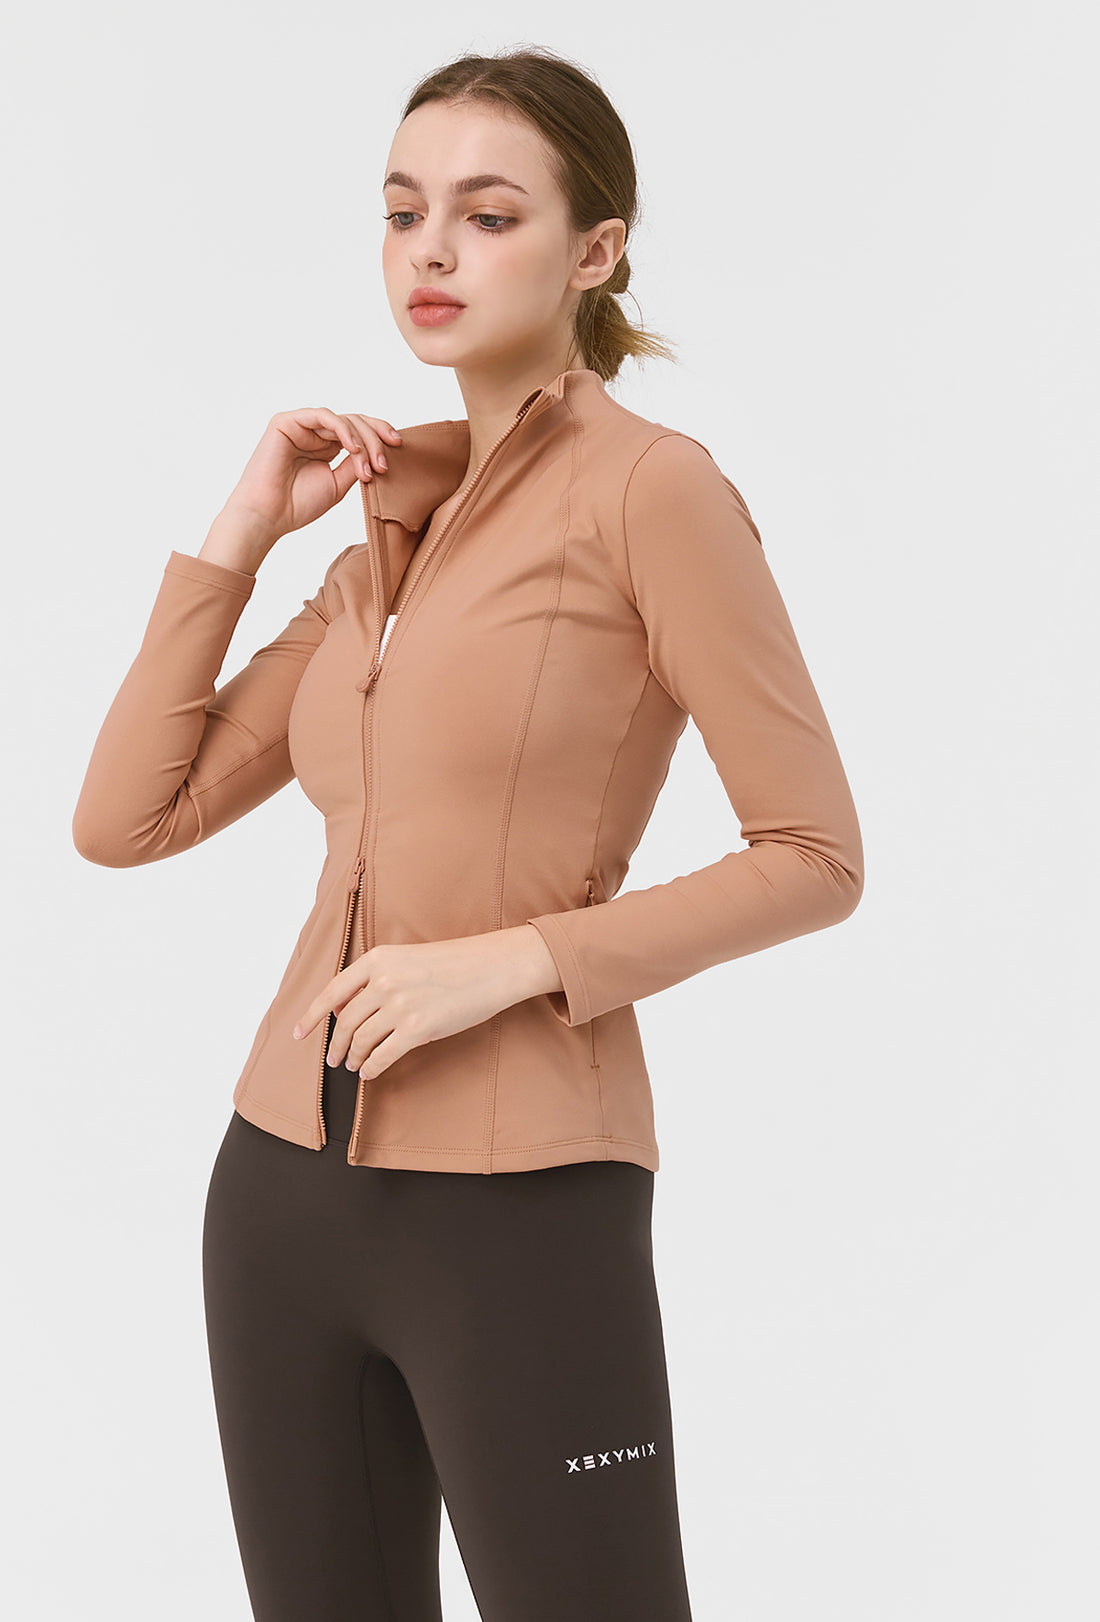 XELLA Intention Slim Fit Zip-up Jacket - Awesome Peach